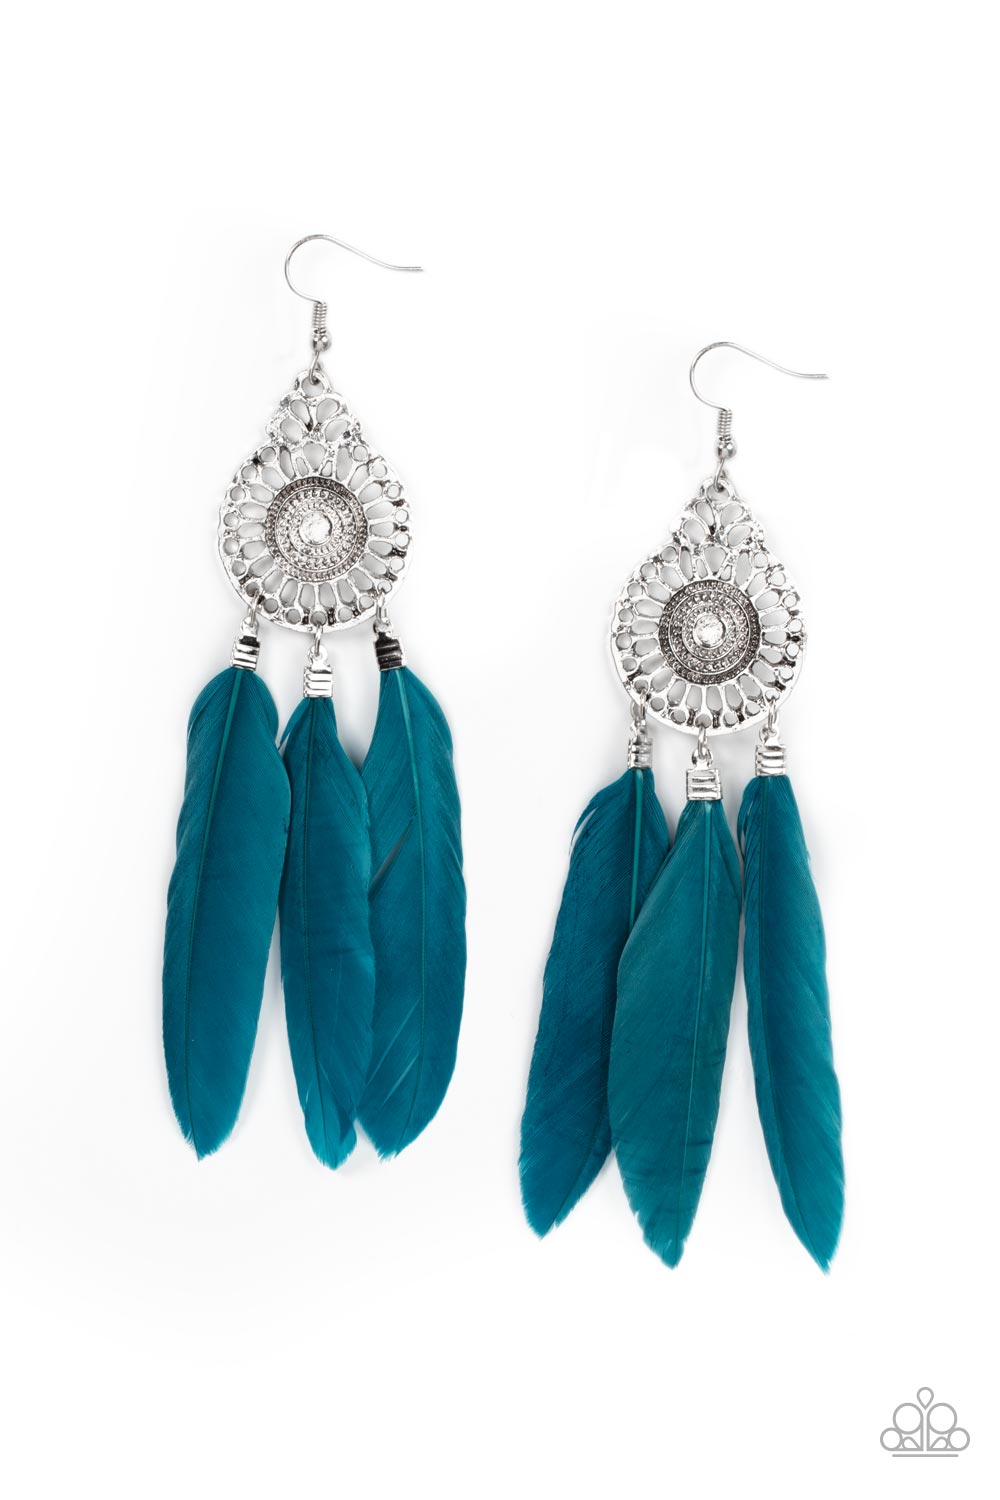 Pretty in PLUMES Blue Feather Earrings - Paparazzi Accessories- lightbox - CarasShop.com - $5 Jewelry by Cara Jewels